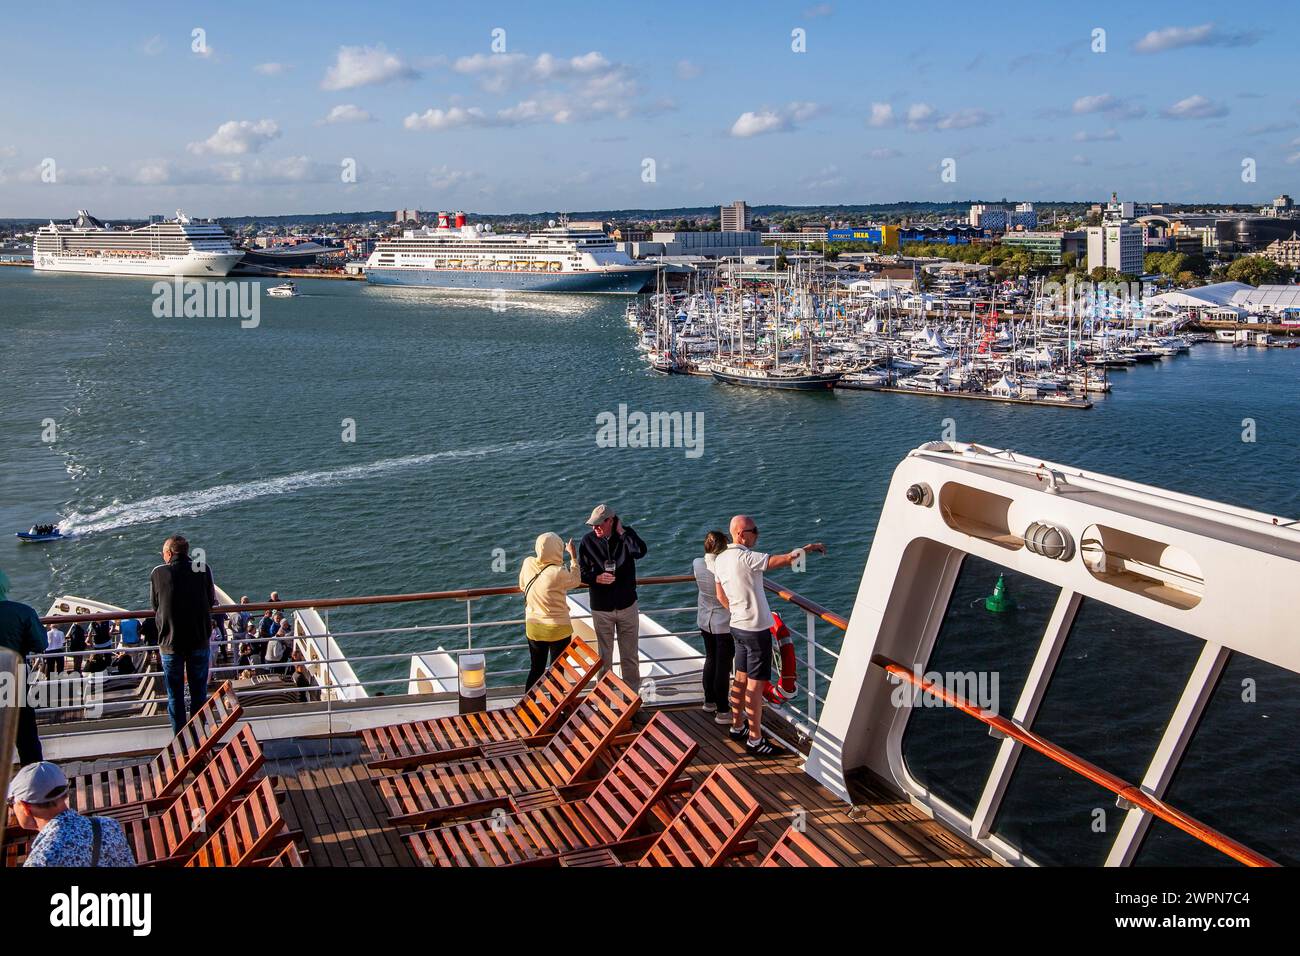 Sun deck of the Queen Mary 2 with cruise ships in the harbor, Southampton, Hampshire, Great Britain, England Stock Photo